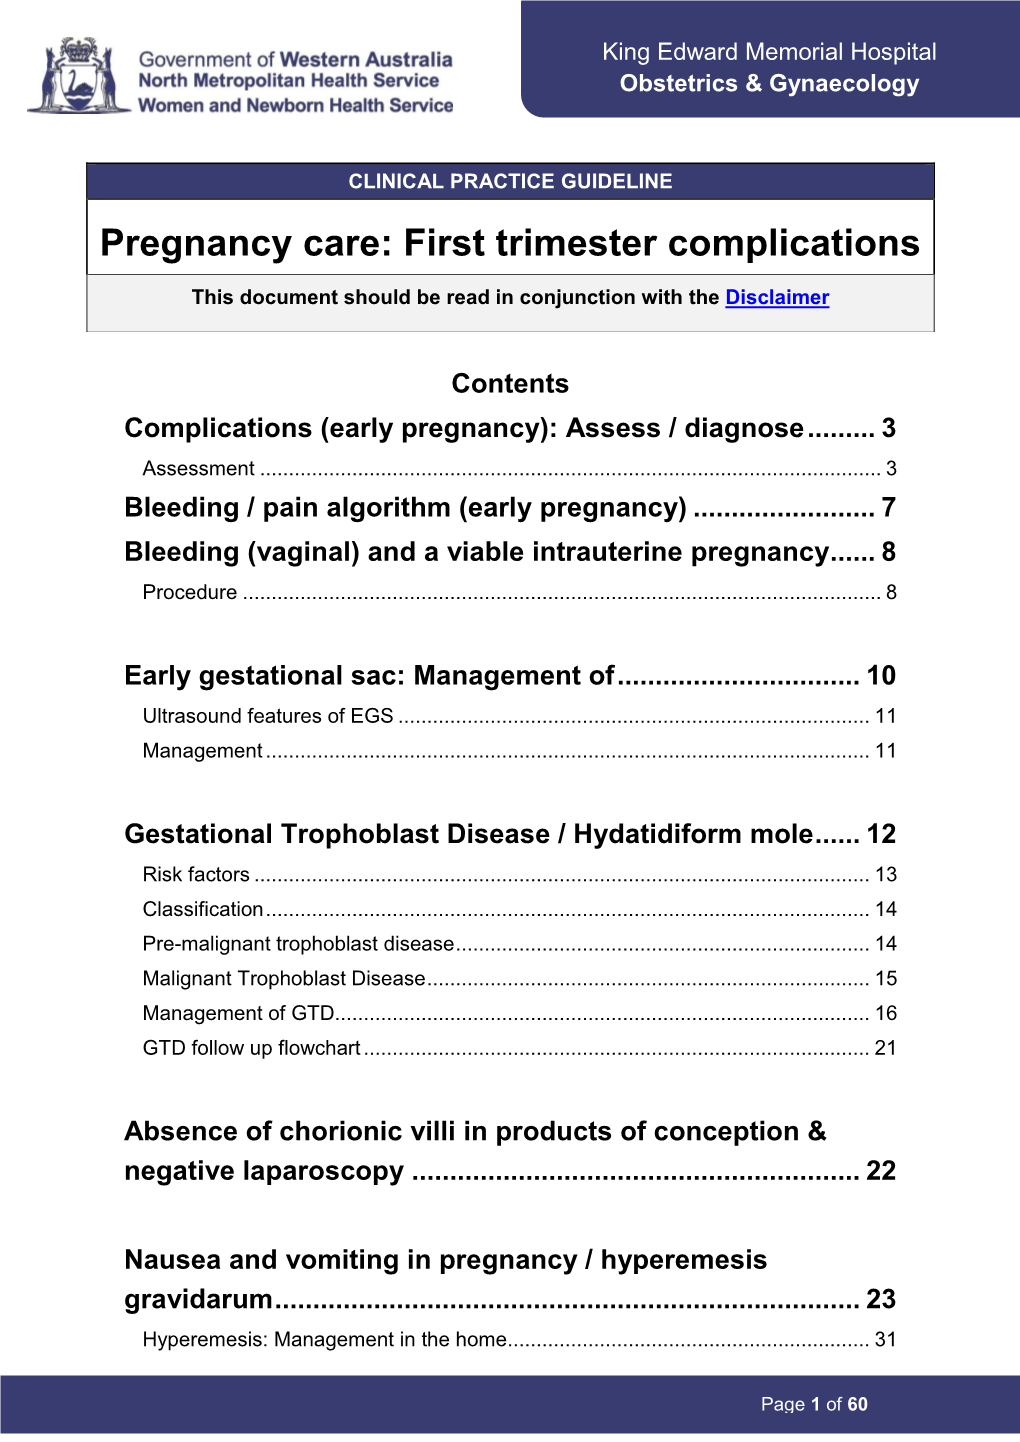 Pregnancy Care: First Trimester Complications